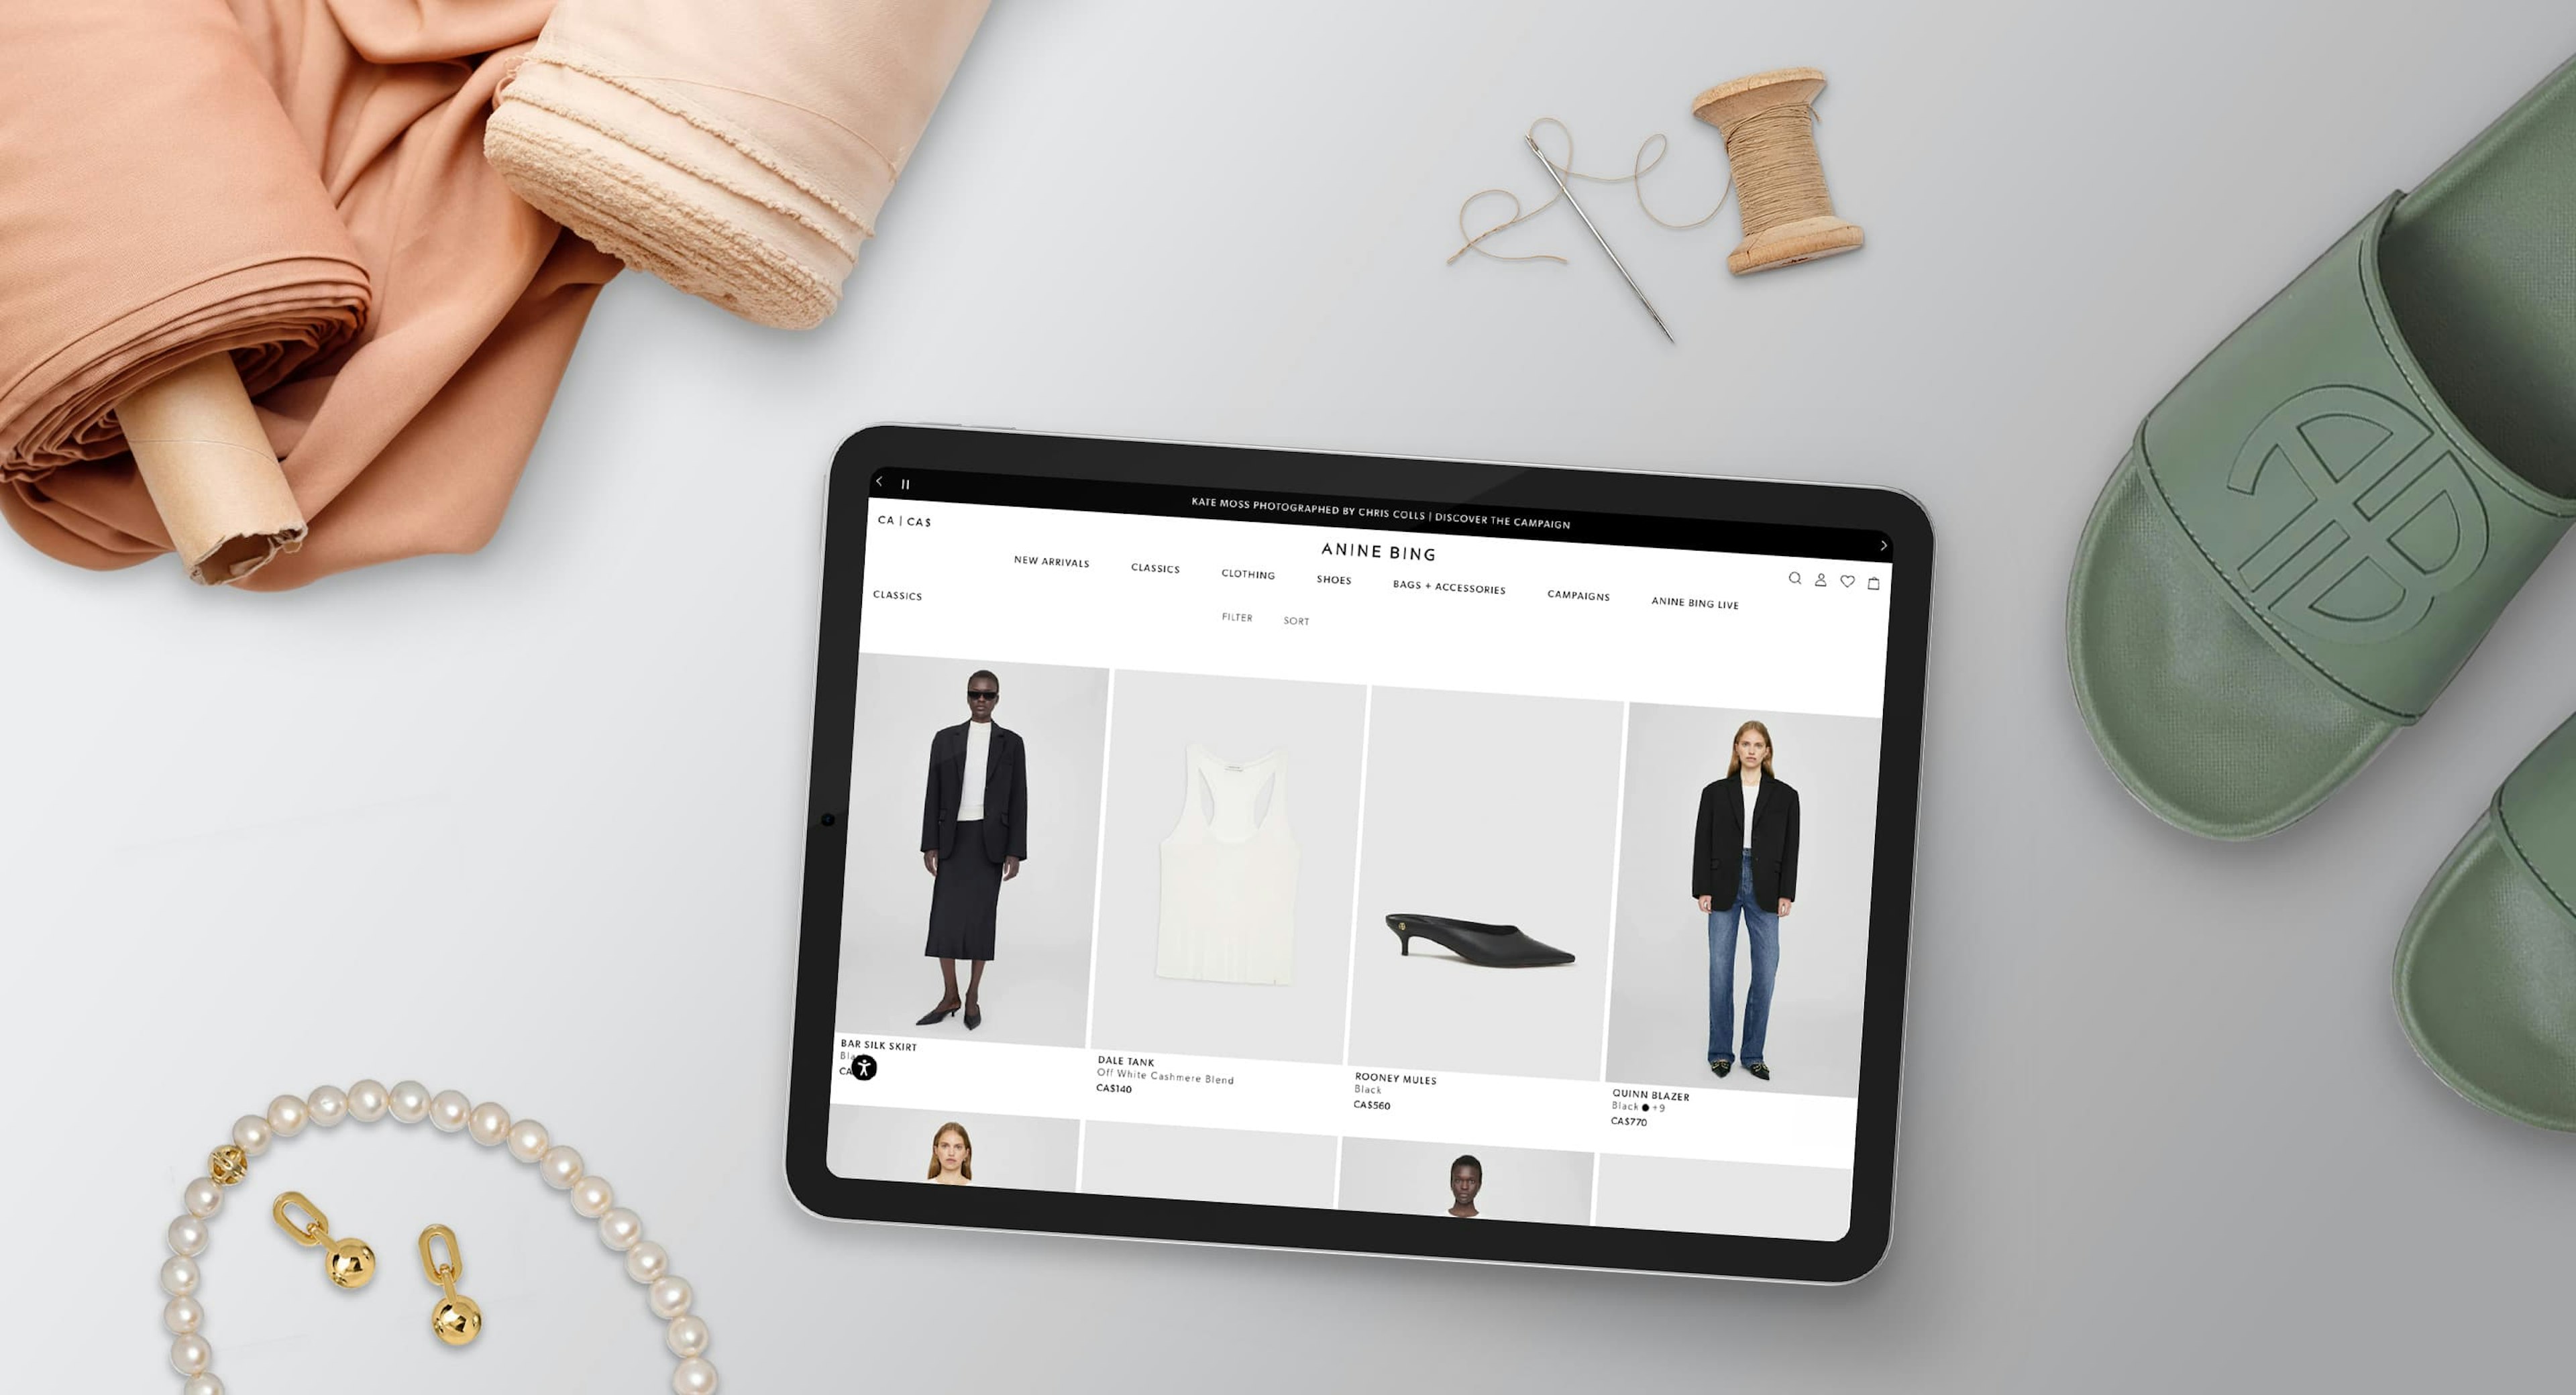 A flatlay on a grey surface including an iPad with the ANINE BING website on it. A pair of shoes, fabric rolls, a needle and thread, and a necklace and earring set surround the iPad.